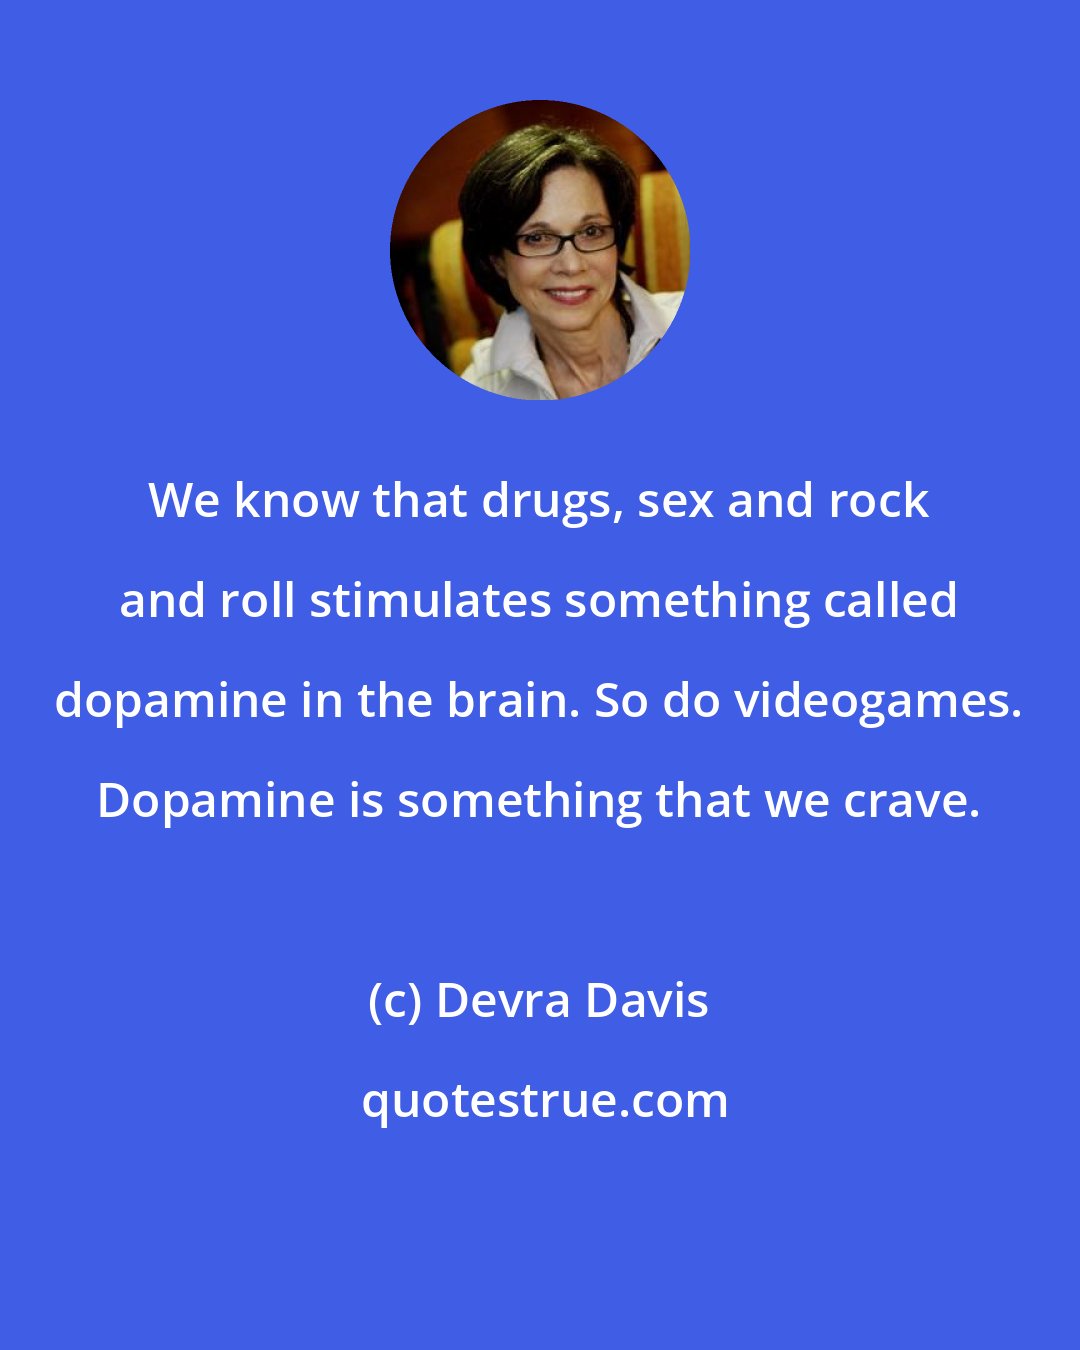 Devra Davis: We know that drugs, sex and rock and roll stimulates something called dopamine in the brain. So do videogames. Dopamine is something that we crave.